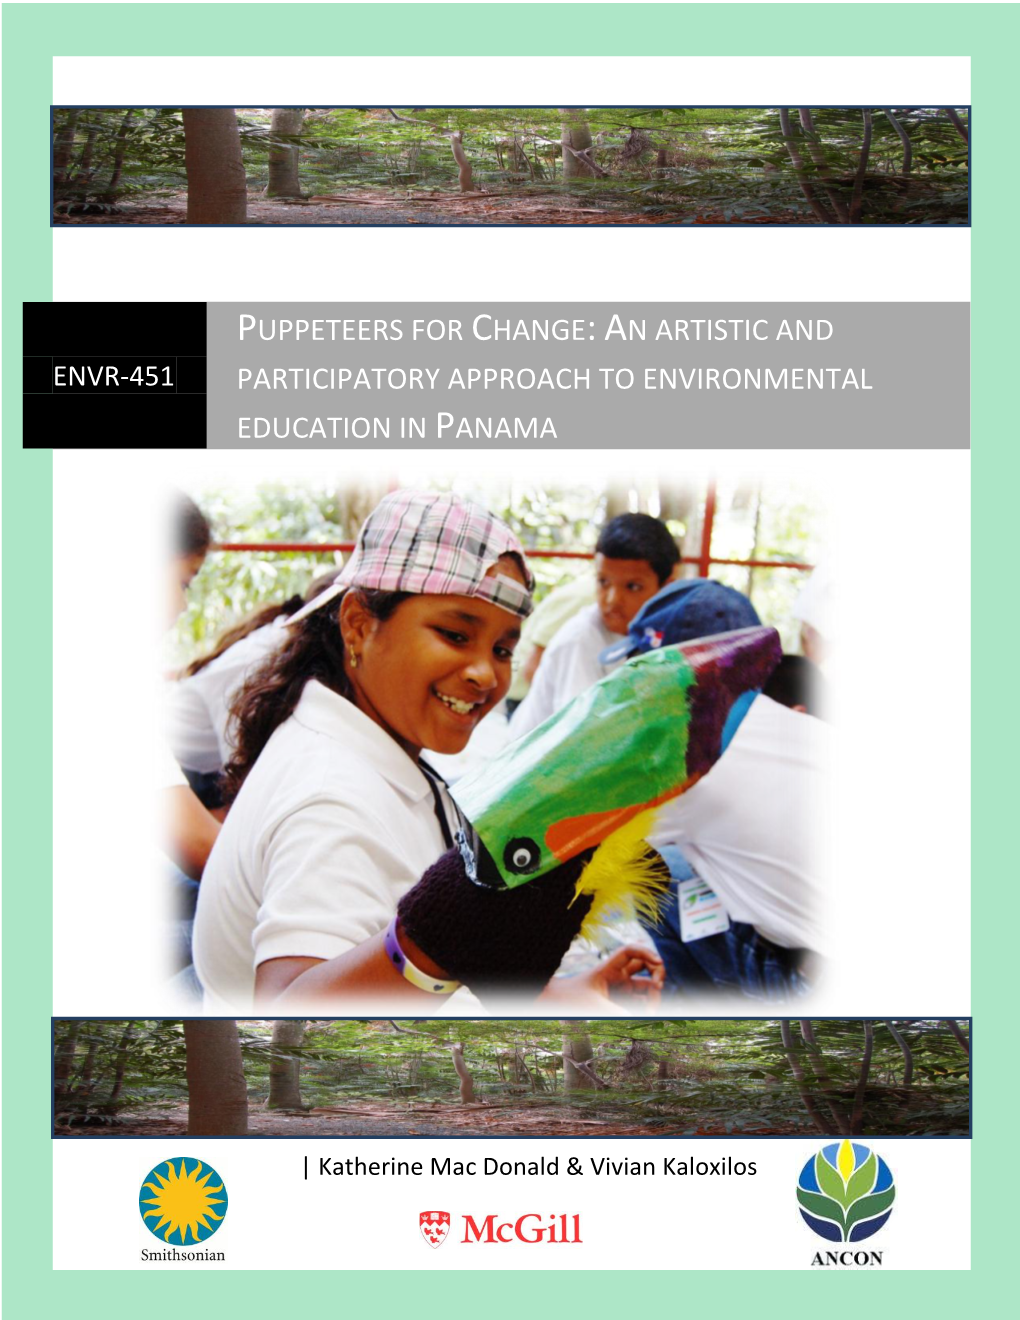 An Artistic and Participatory Approach to Environmental Education in Panama By: Katherine Mac Donald & Vivian Kaloxilos